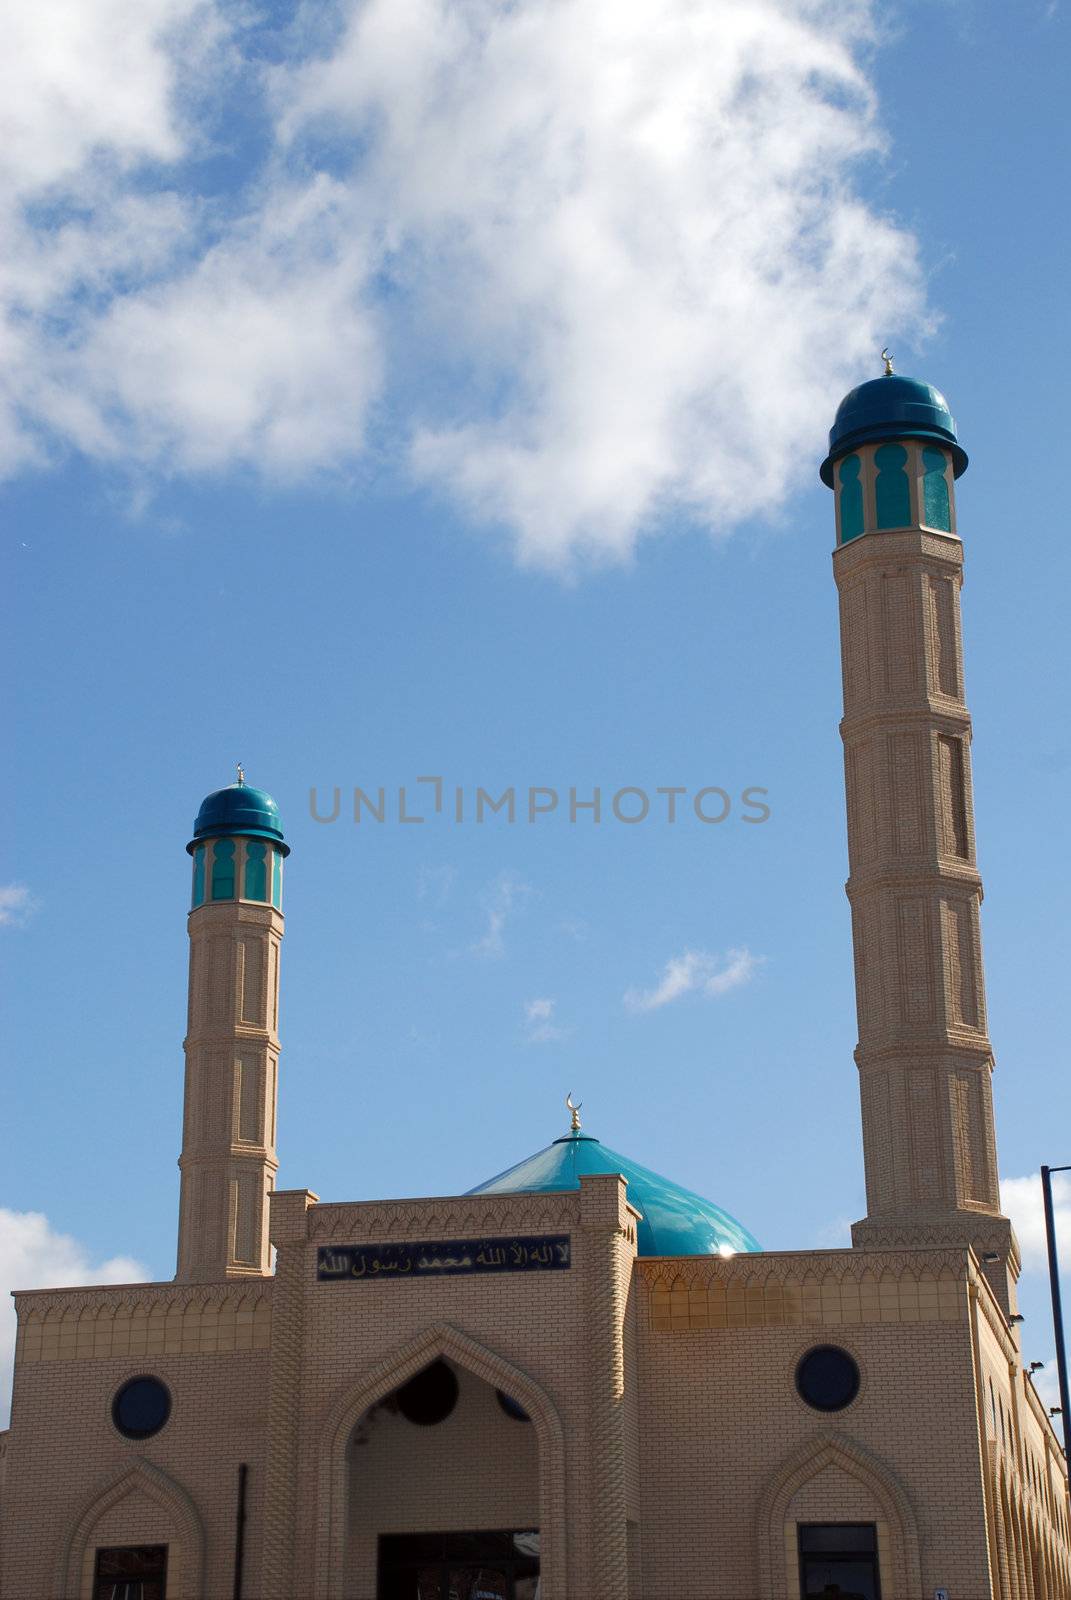 English Mosque by pwillitts